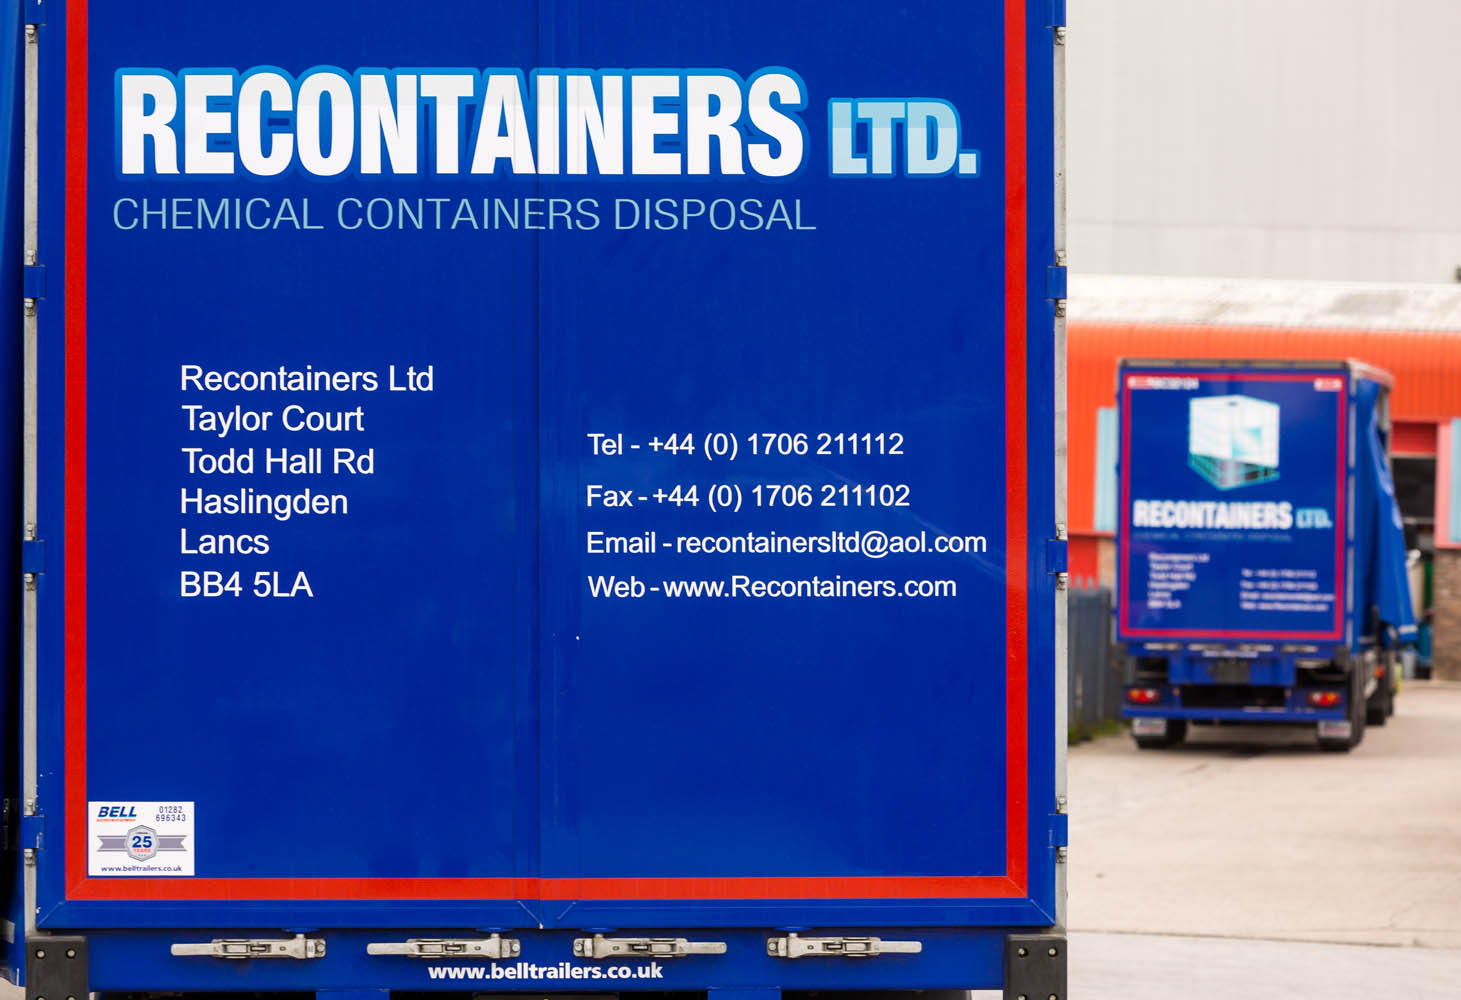 Two Recontainers lorries, fully loaded with reconditioned IBCs, ready for delivery to customers in the North of England